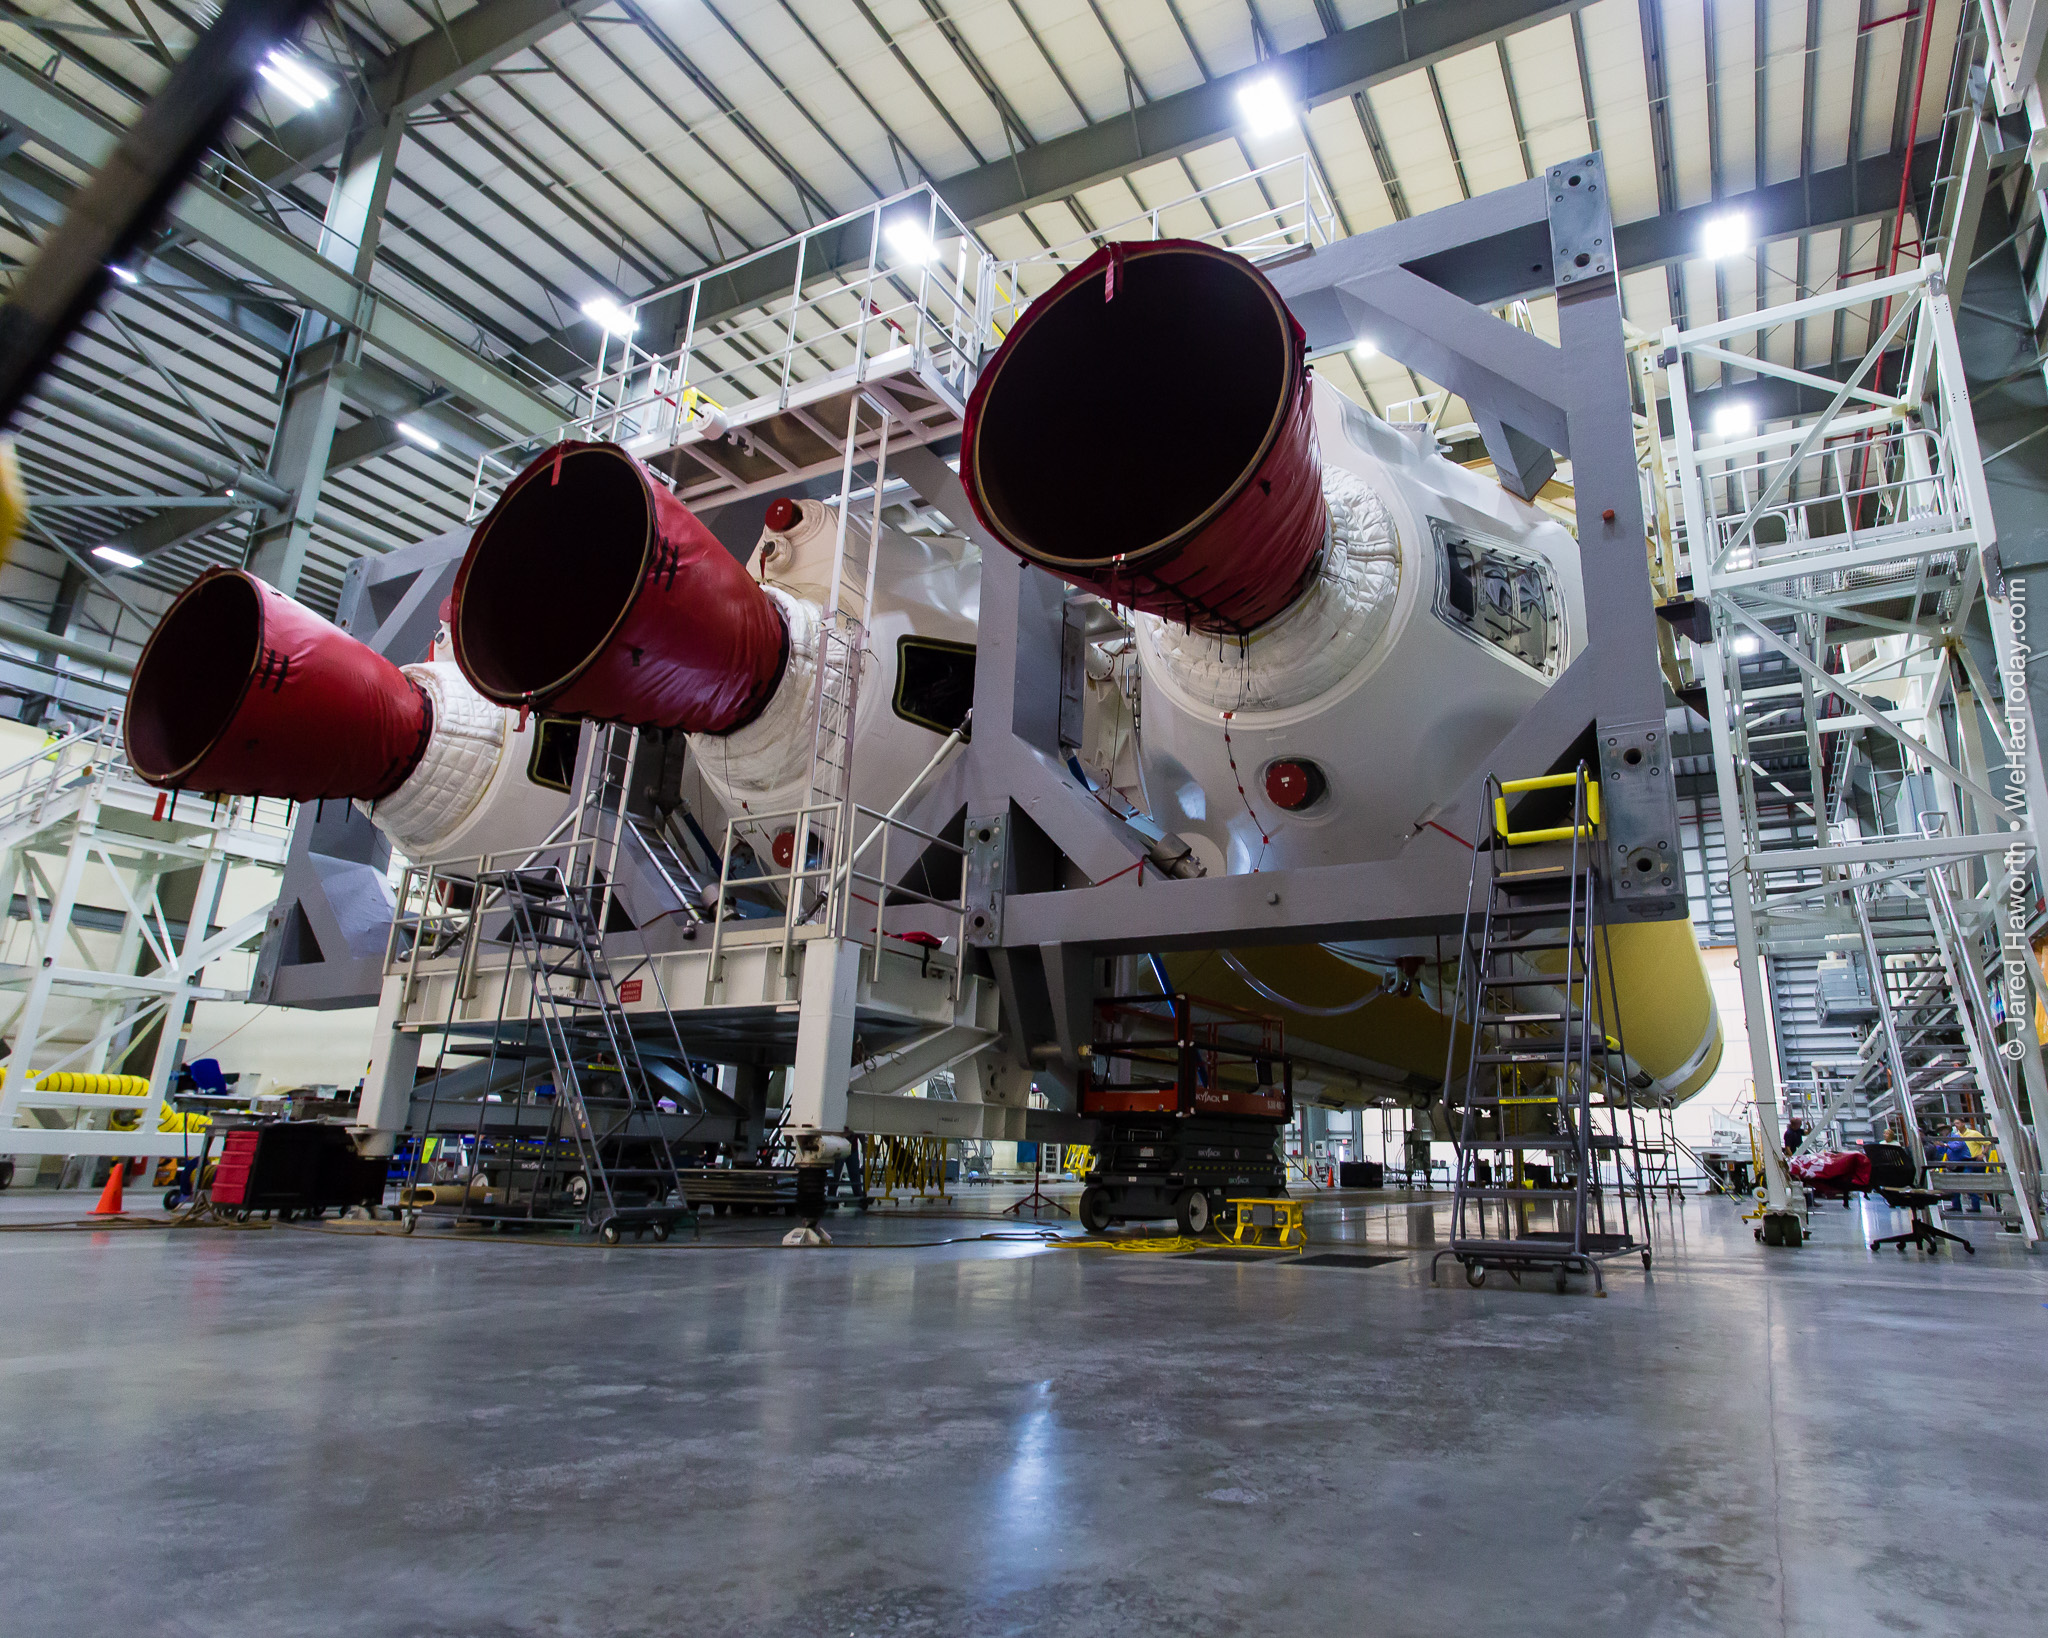 Looking at the business end of the Delta IV Heavy rocket, three Aerojet Rocketdyne RS-68 main engines.